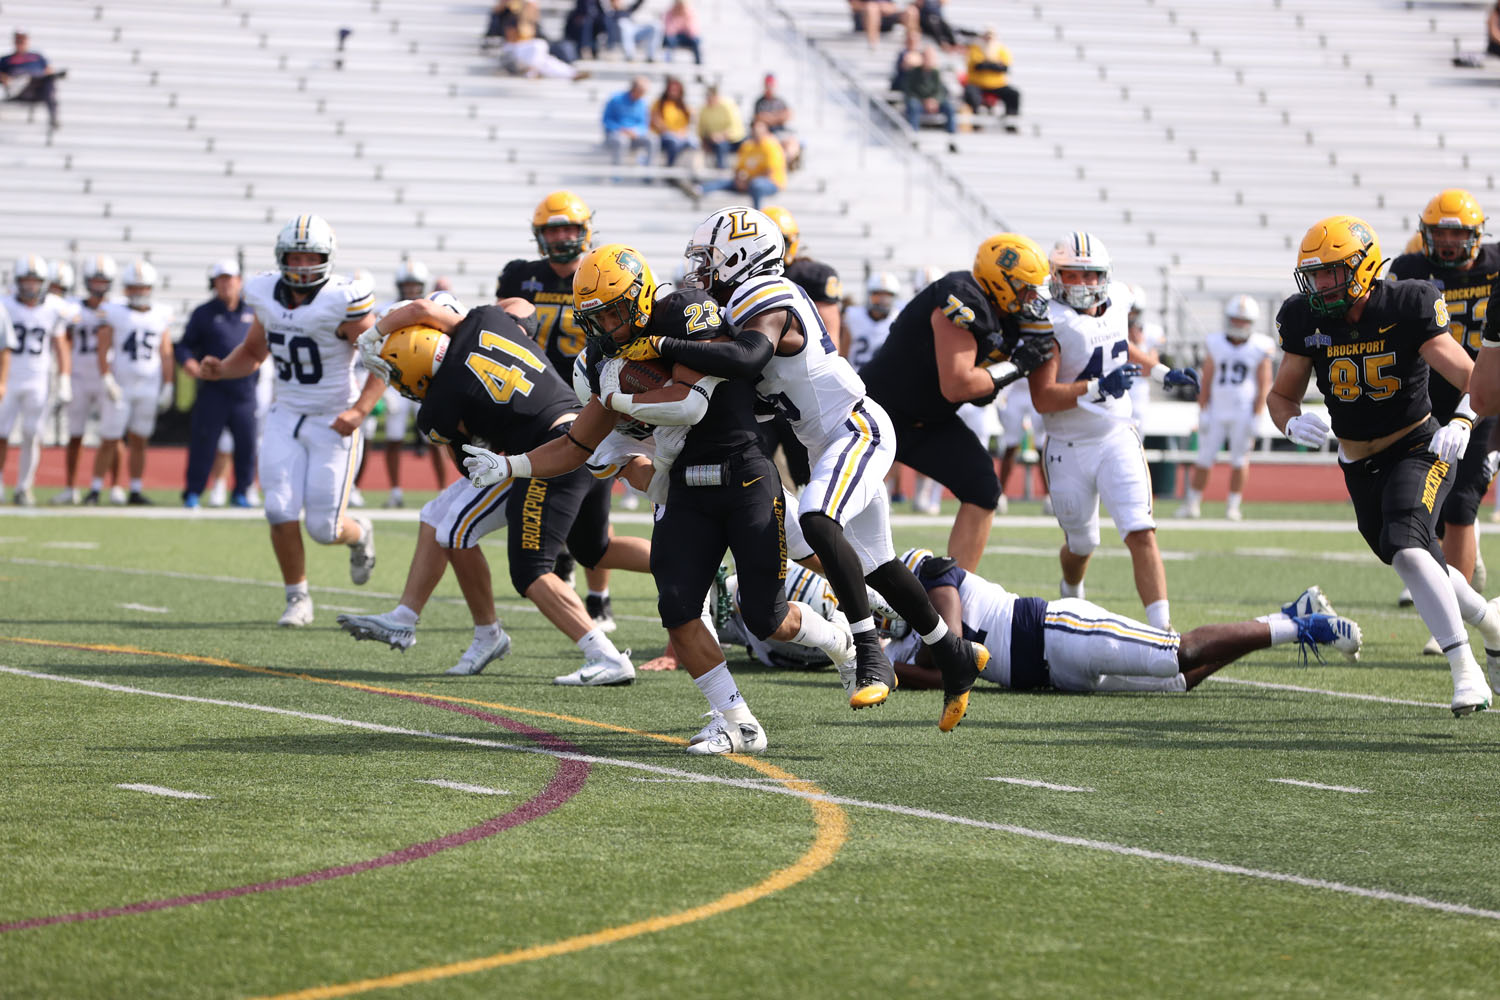 Breaking tackles on the run by Brockport